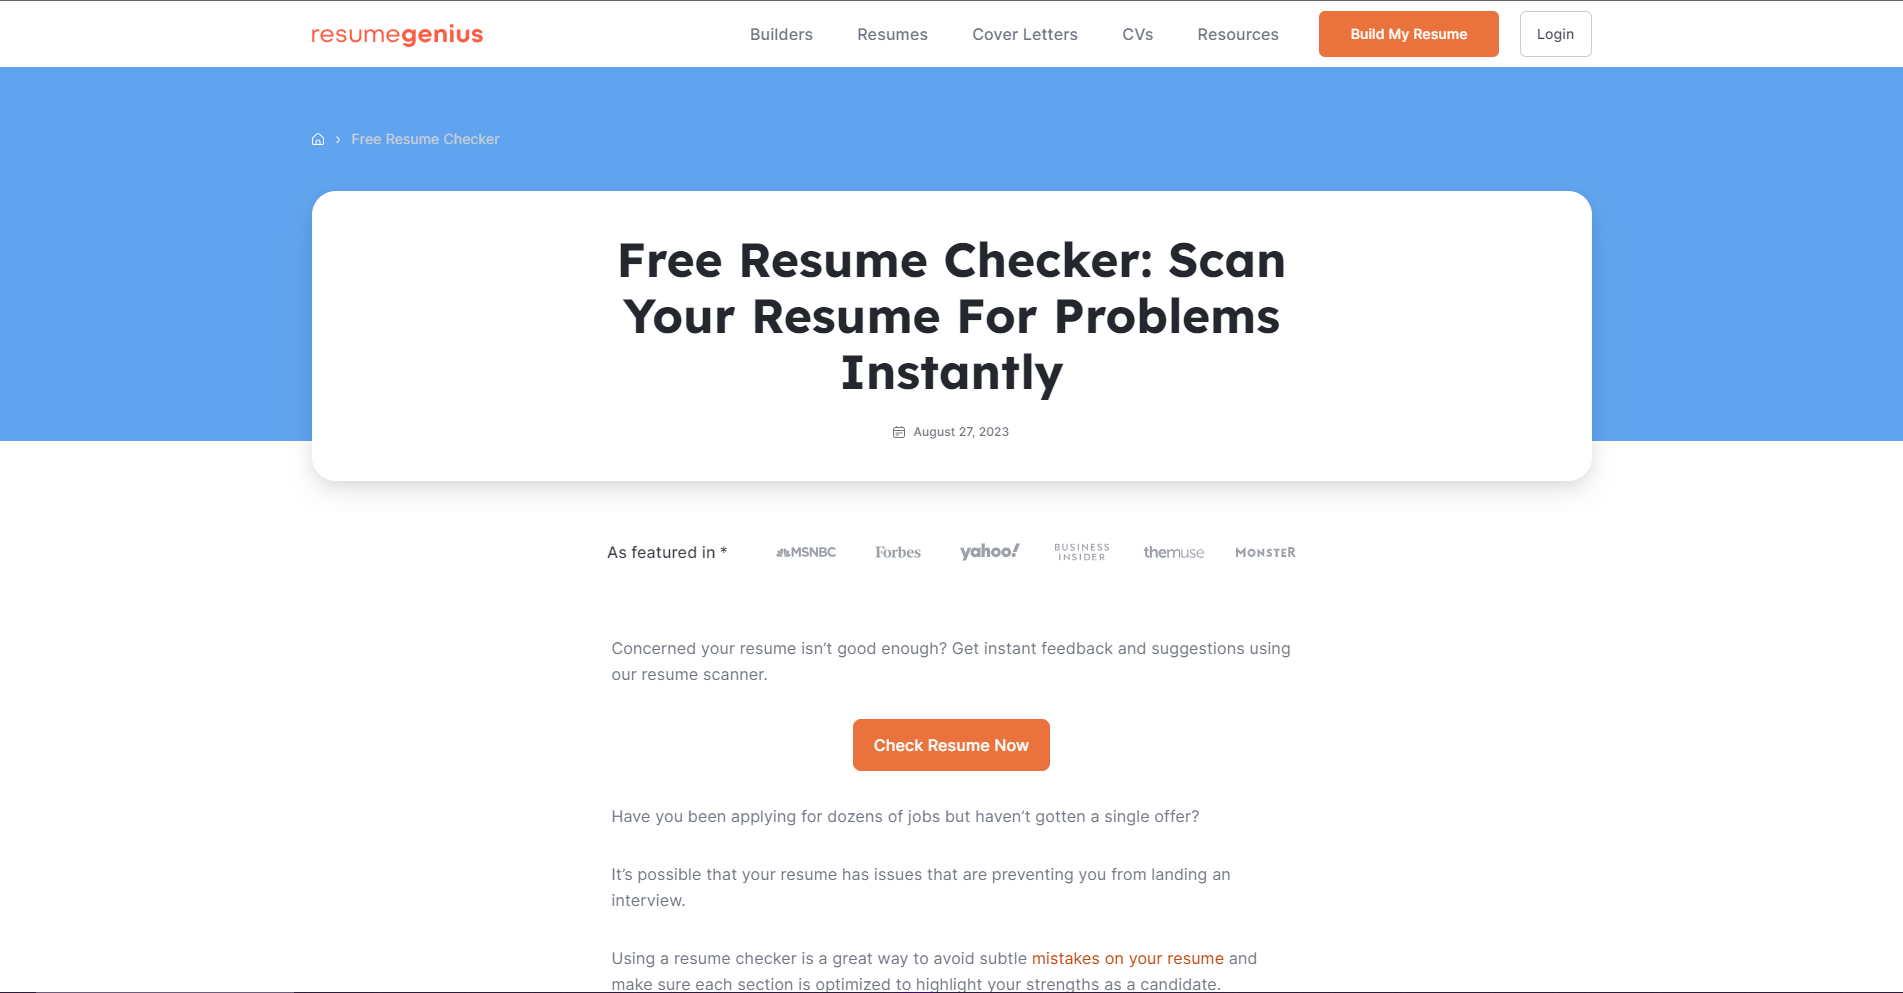 Optimize Your Resume in Minutes